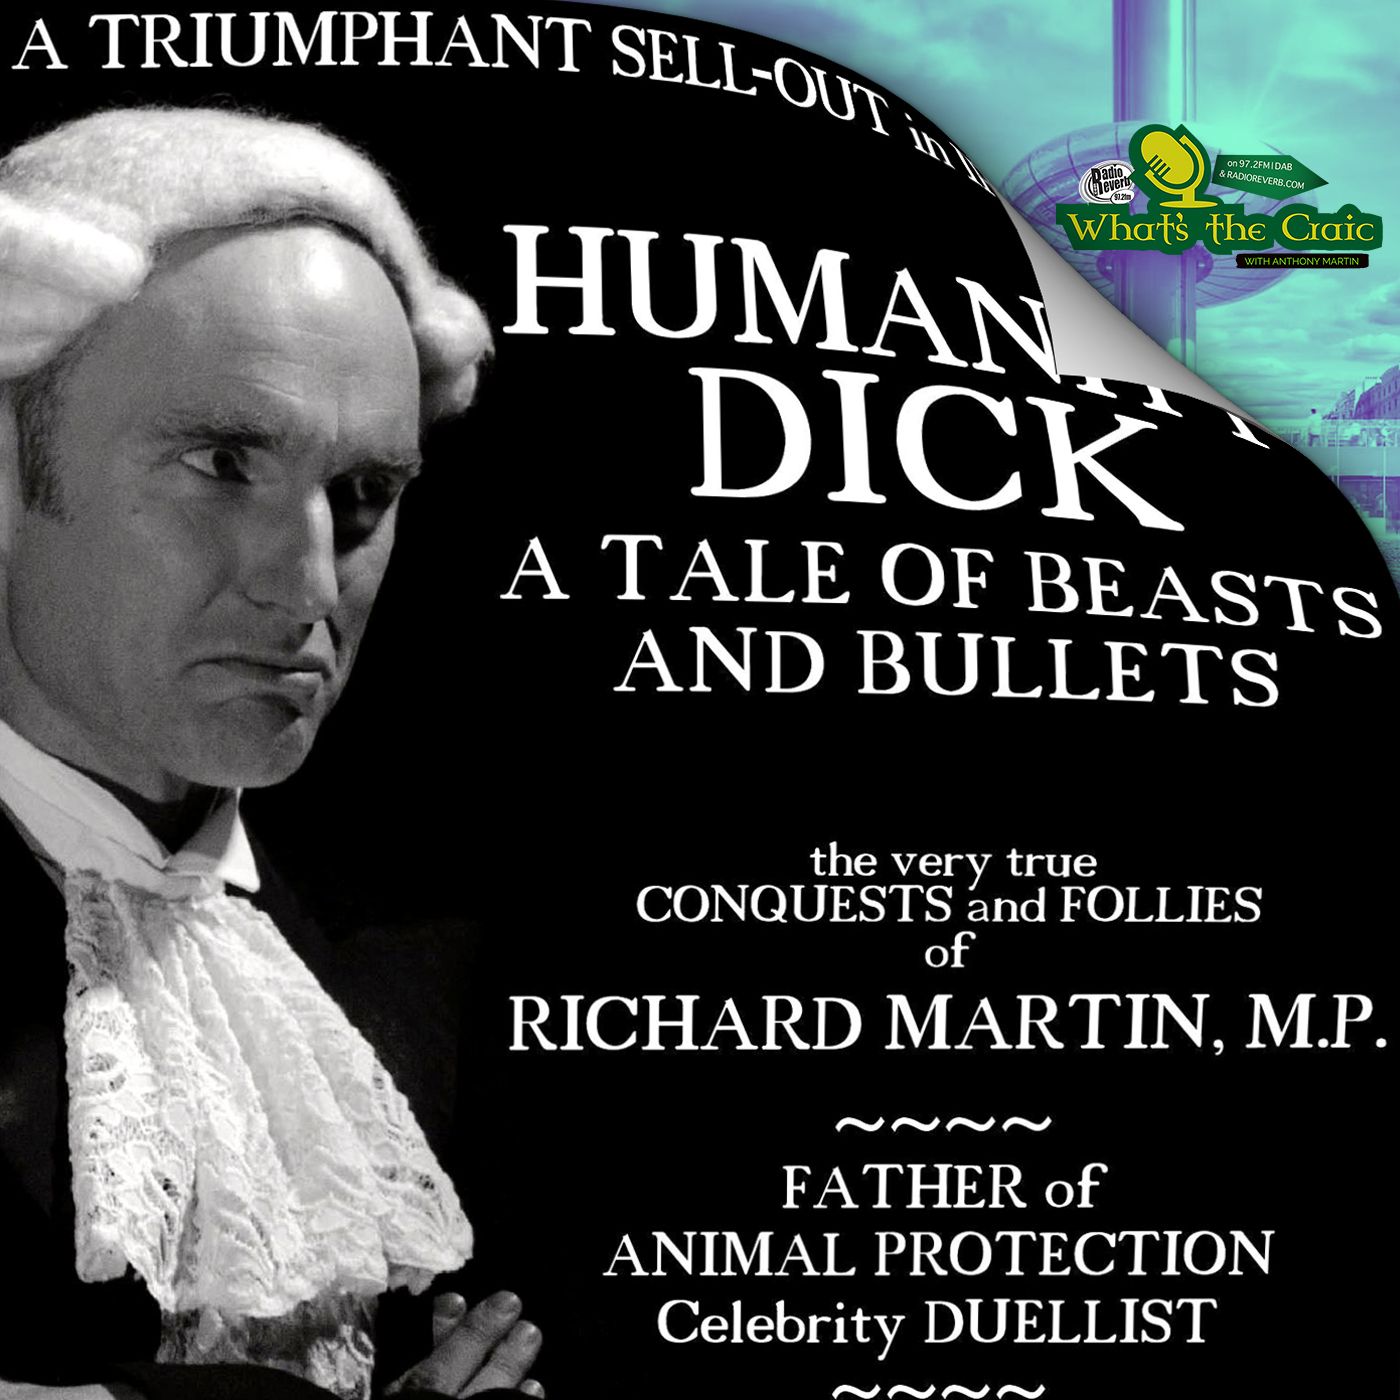 Humanity Dick - The Irishman who founded the RSPCA